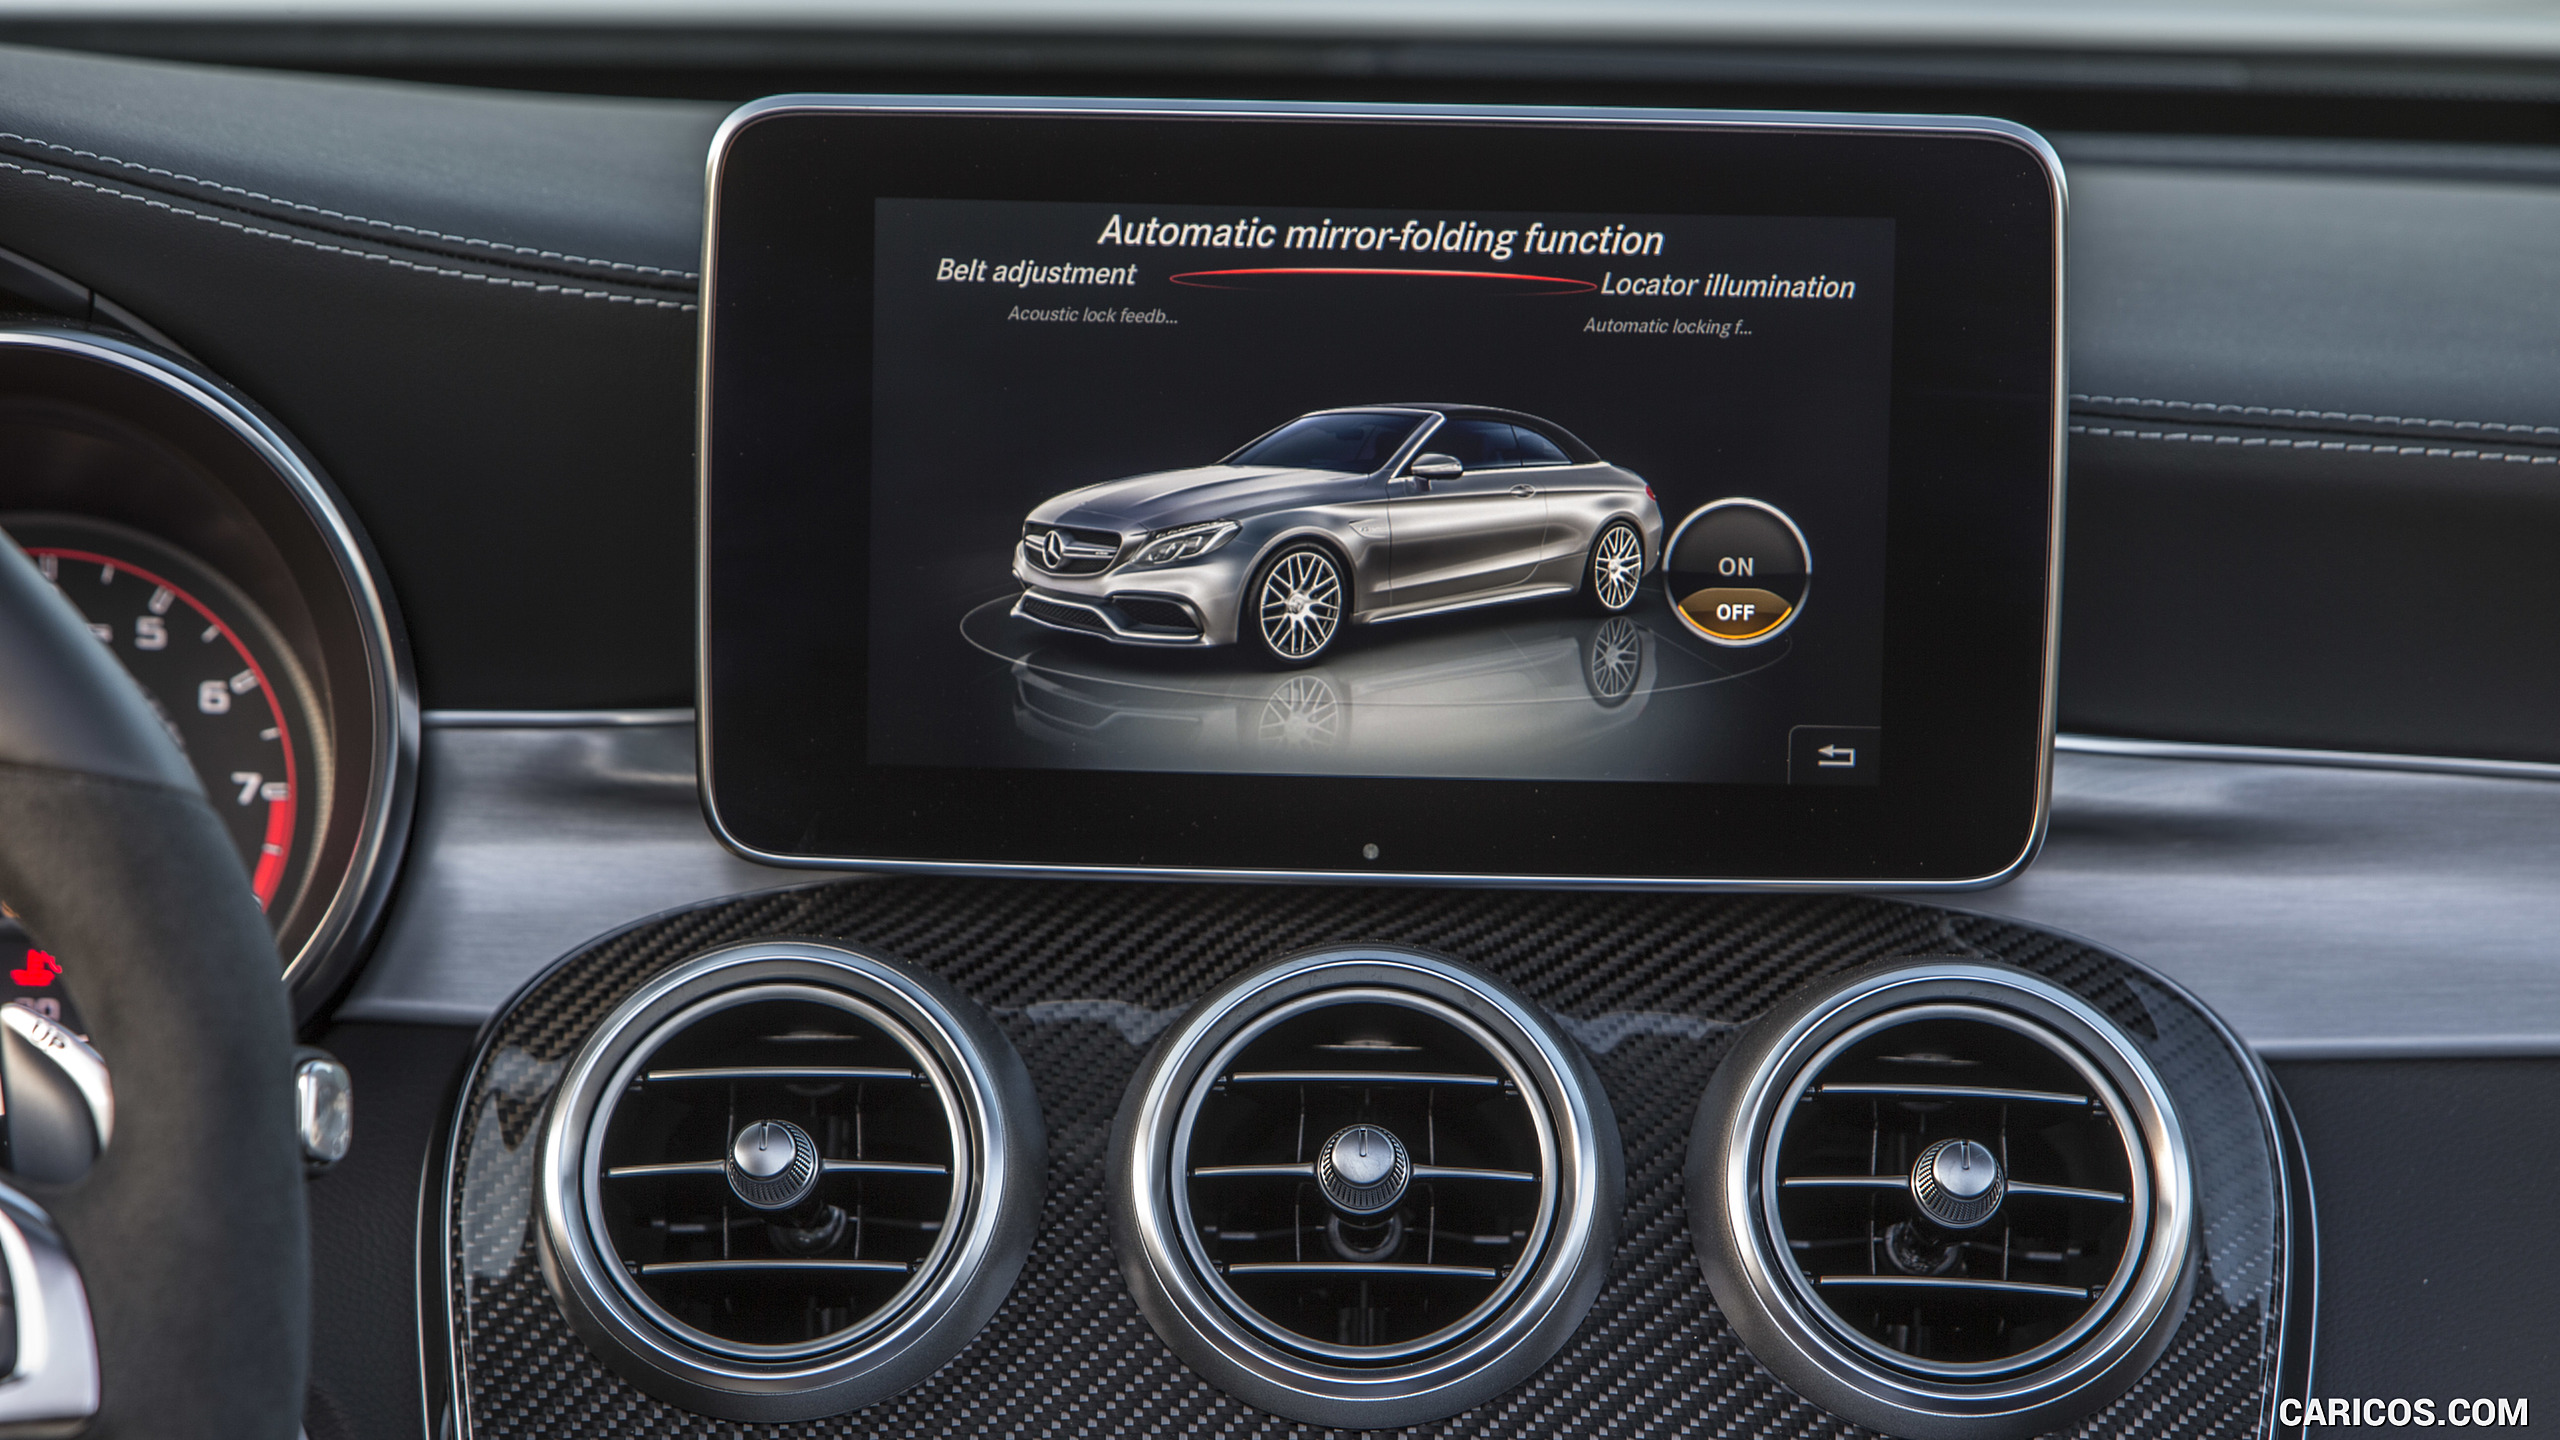 2017 Mercedes-AMG C63 S Cabriolet - Infotainment Screen - Central Console, #160 of 222